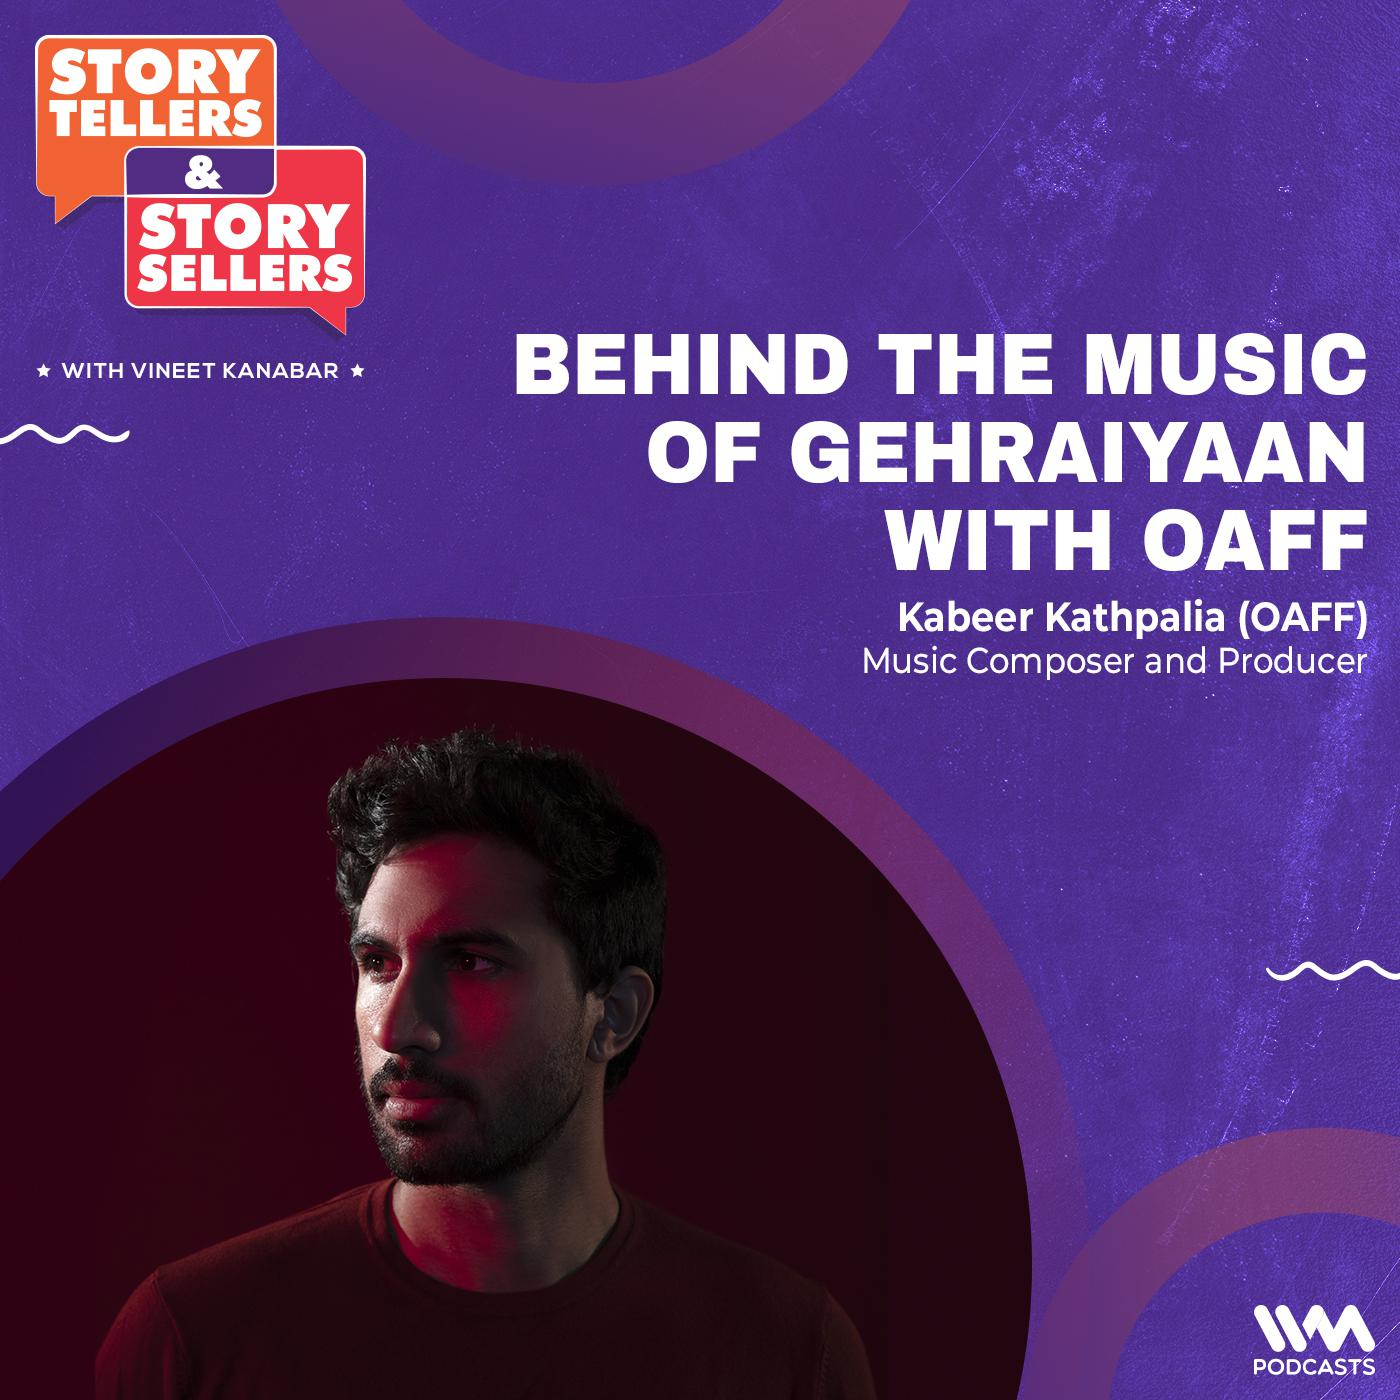 Behind the Music of Gehraiyaan with OAFF